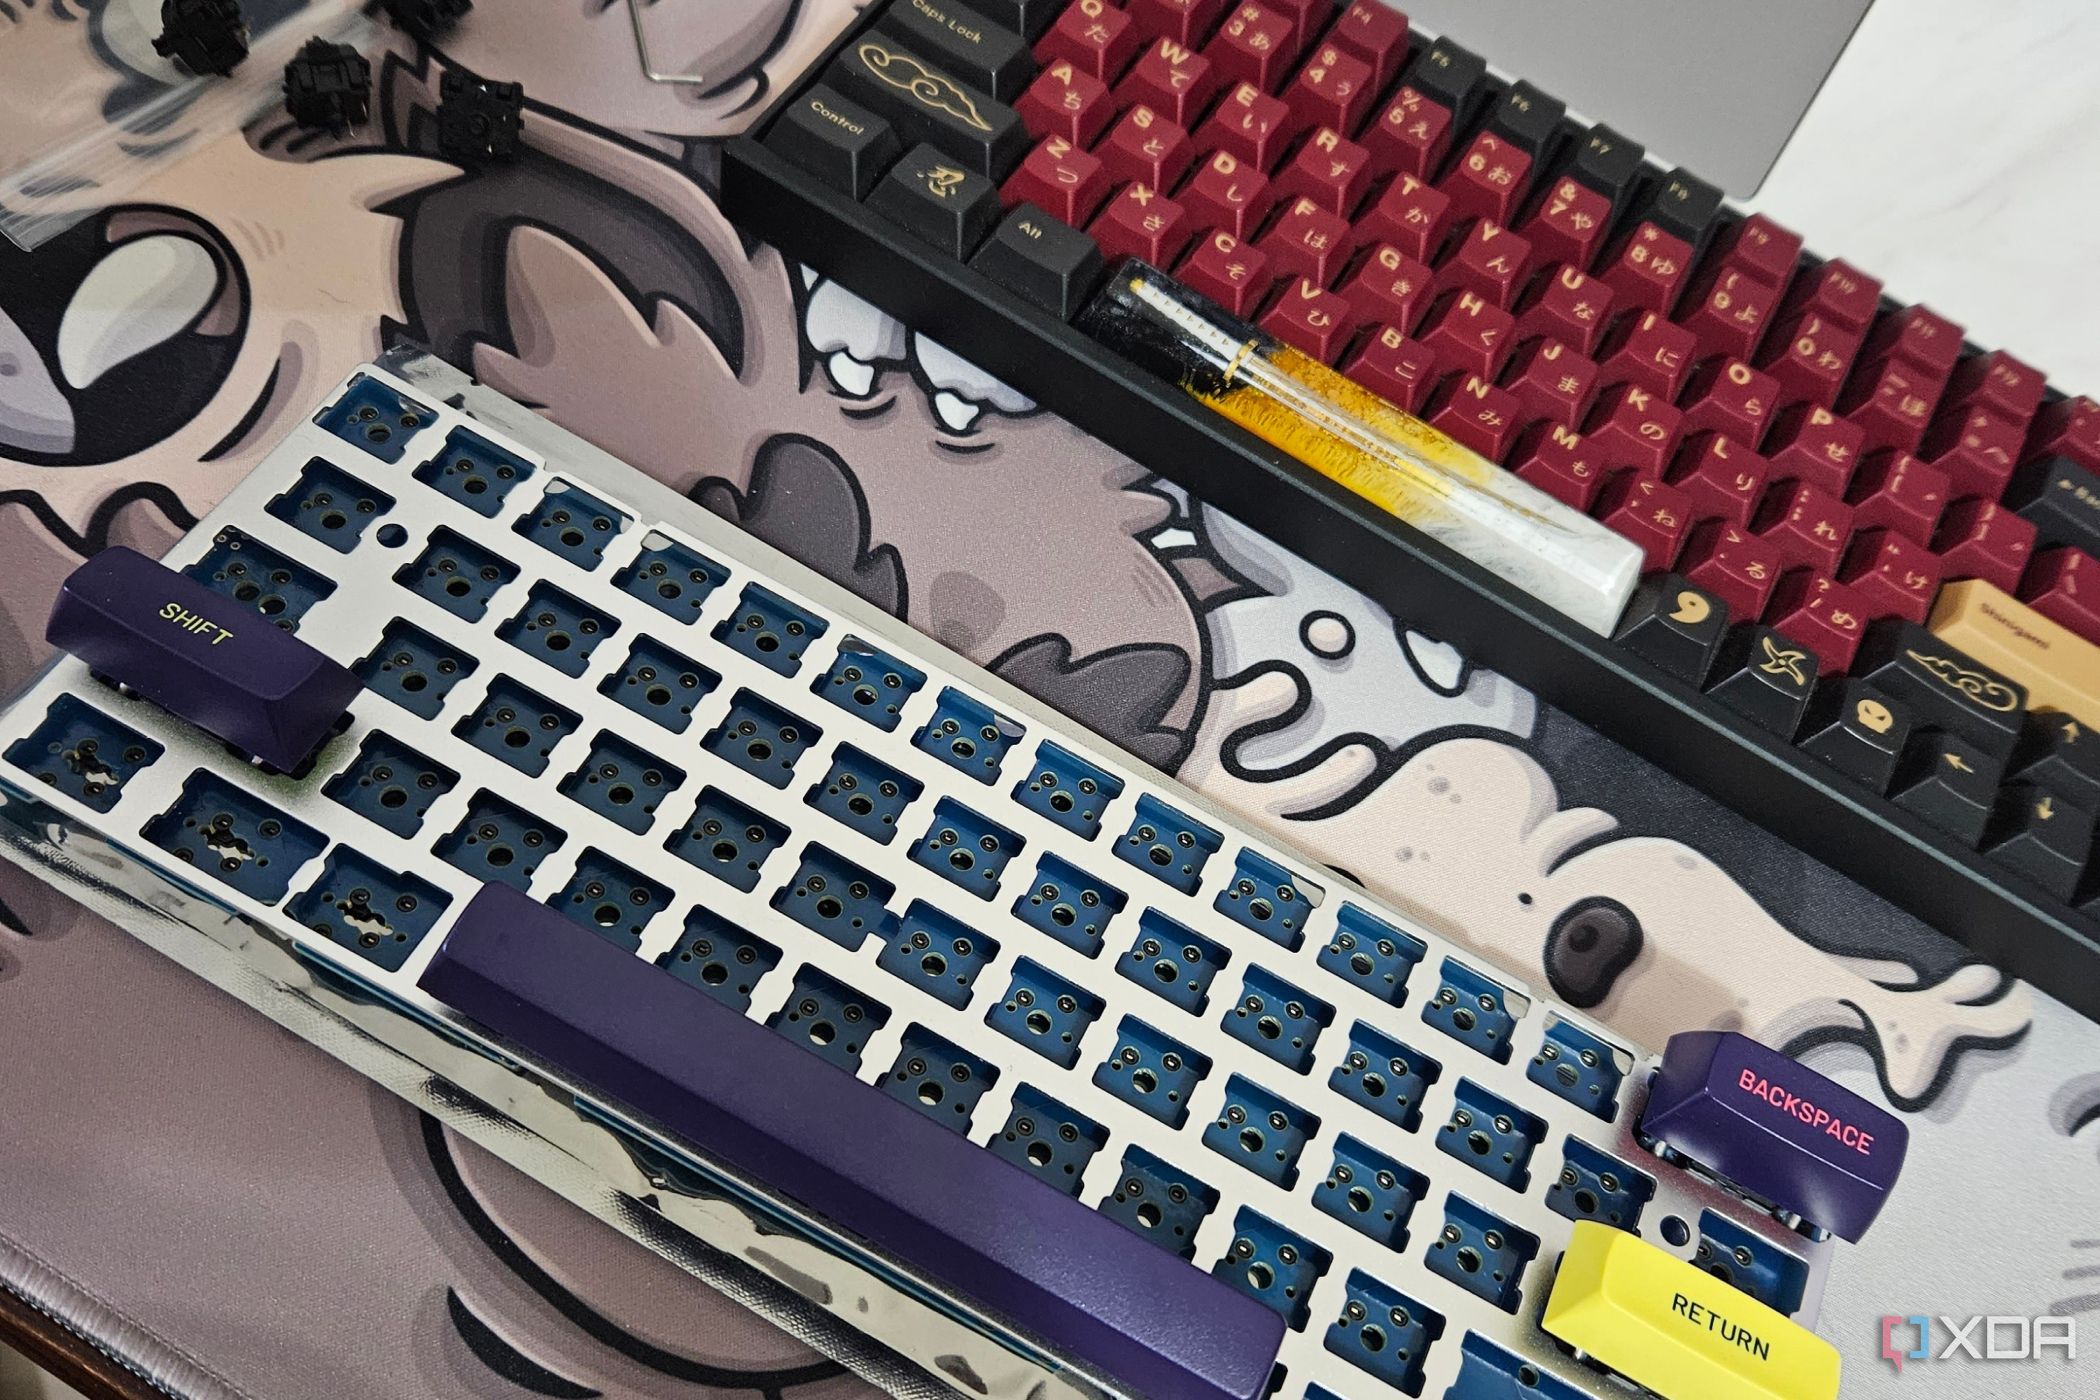 How to build your own mechanical keyboard